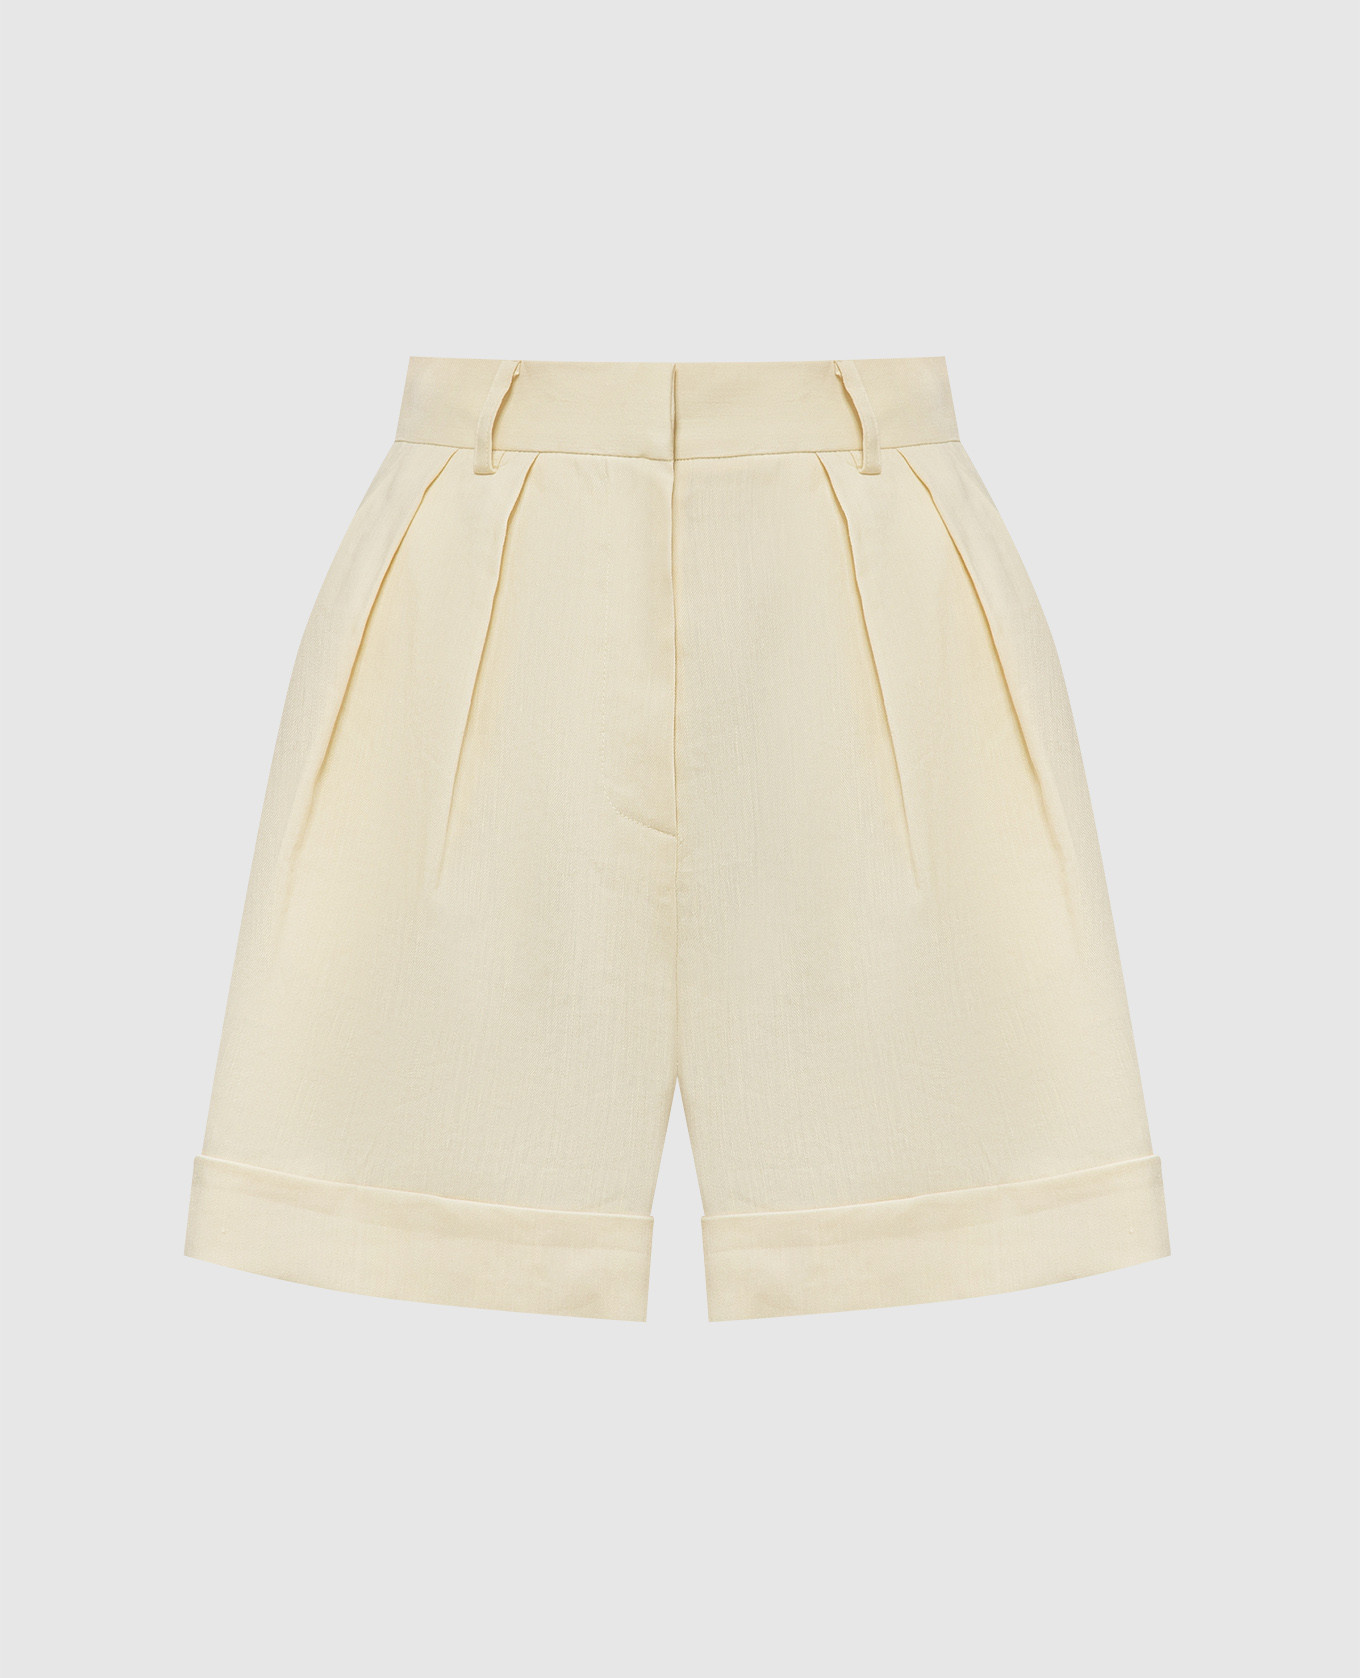 Rina yellow shorts with linen